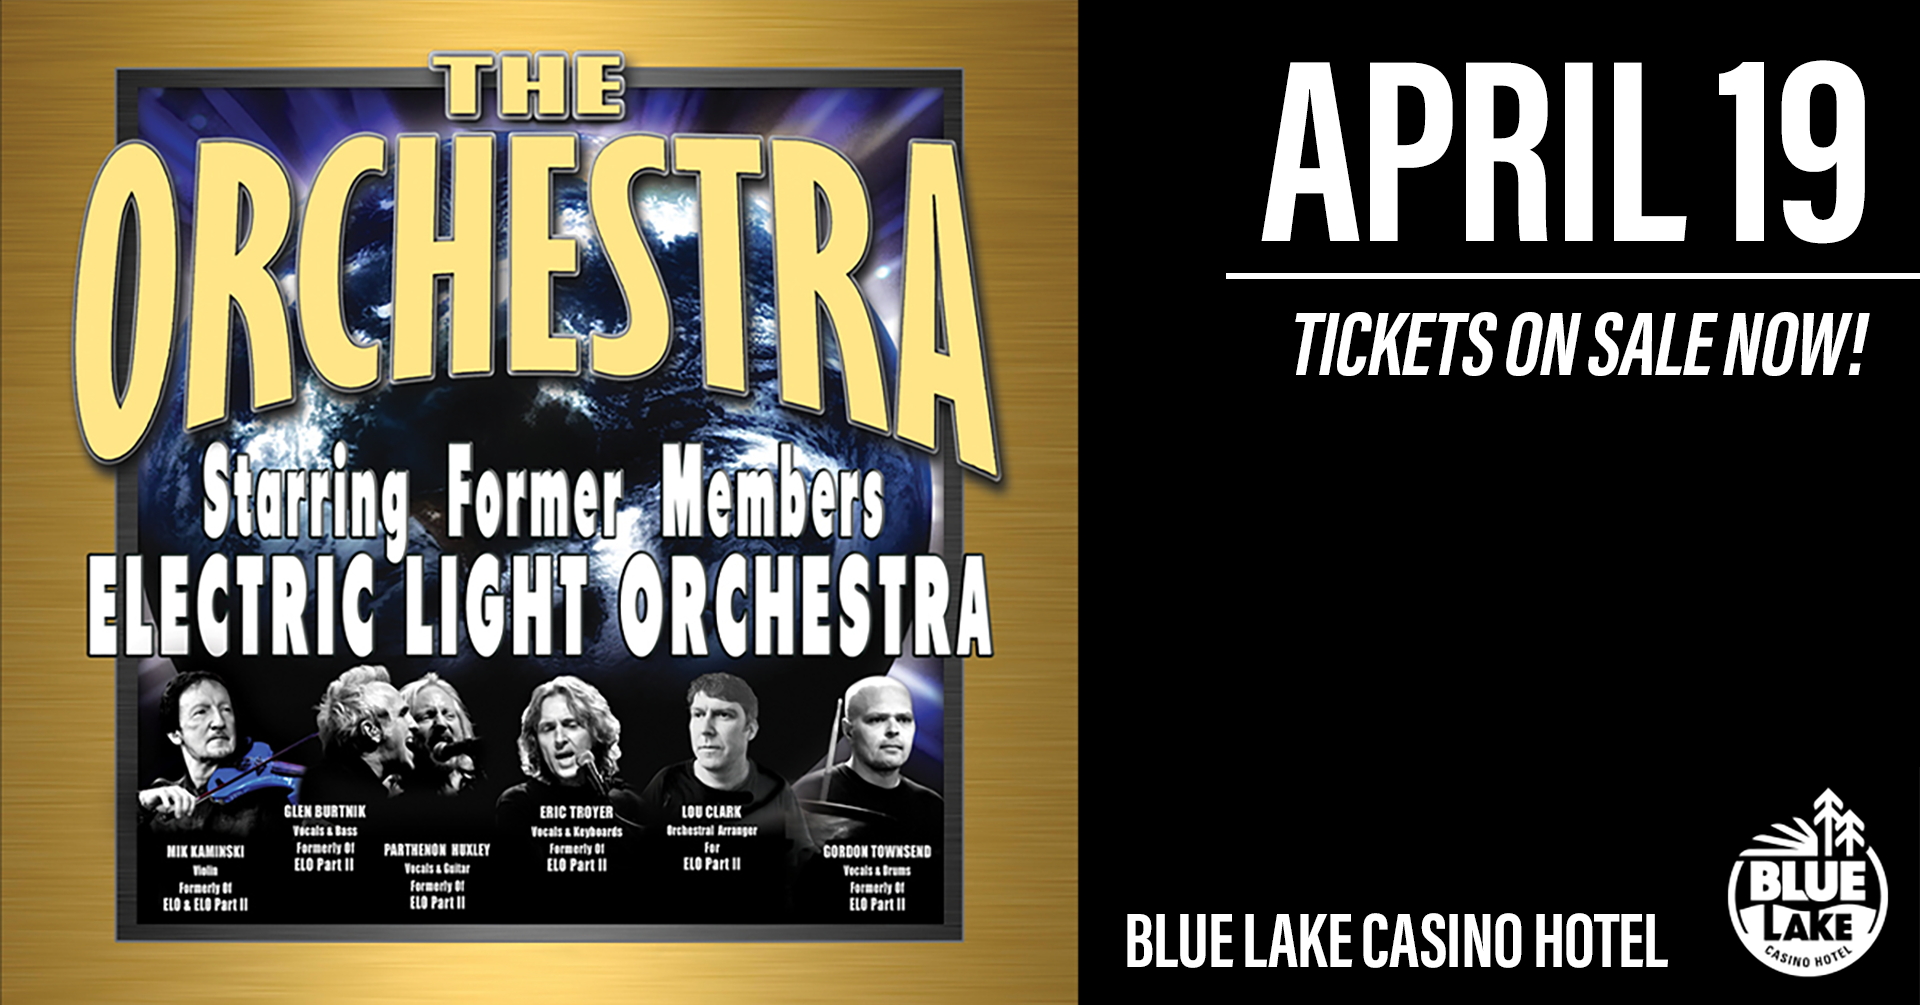 The Orchestra performs at Blue Lake Casino Hotel on April 19th